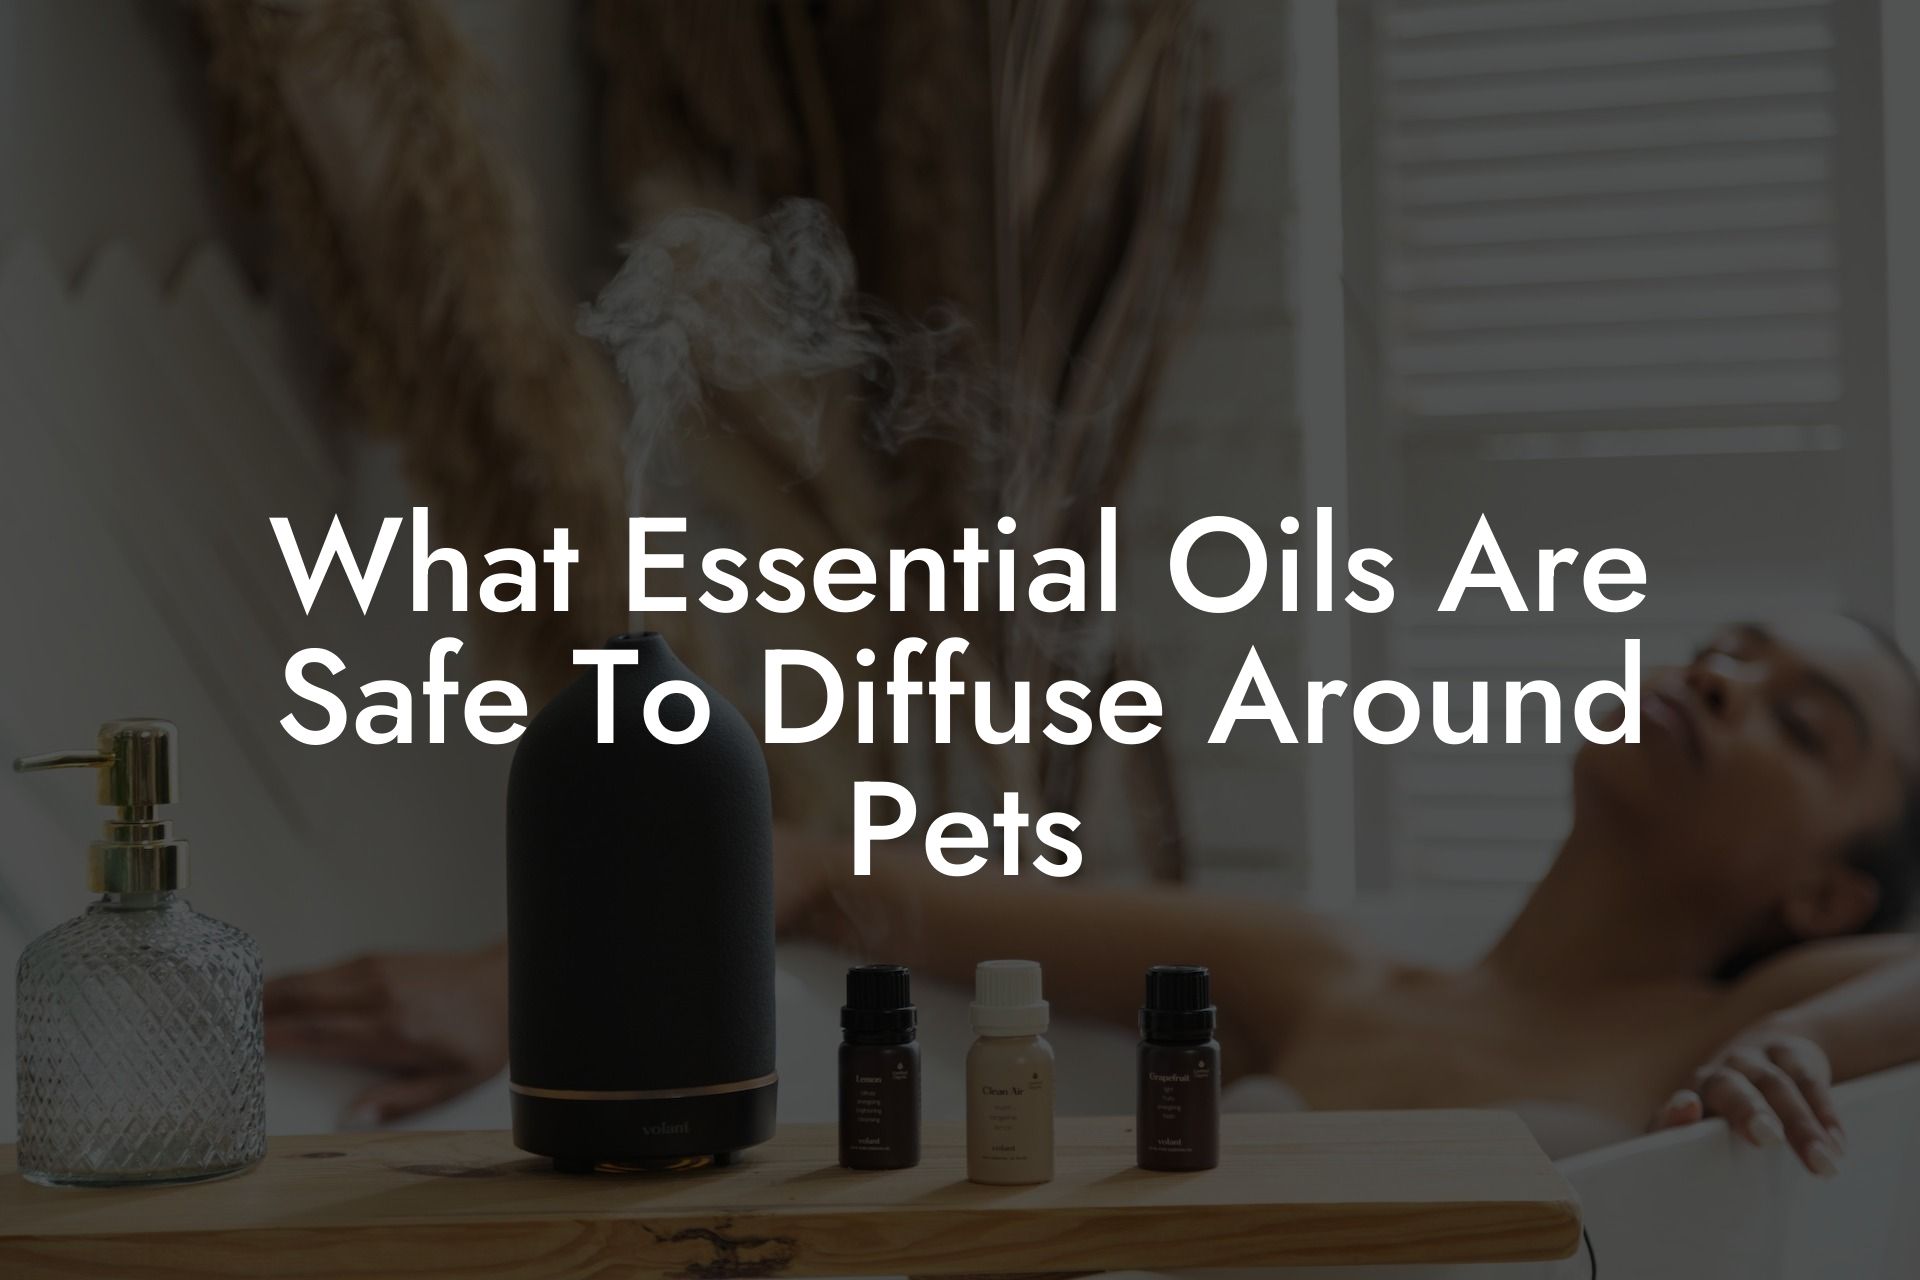 What Essential Oils Are Safe To Diffuse Around Pets